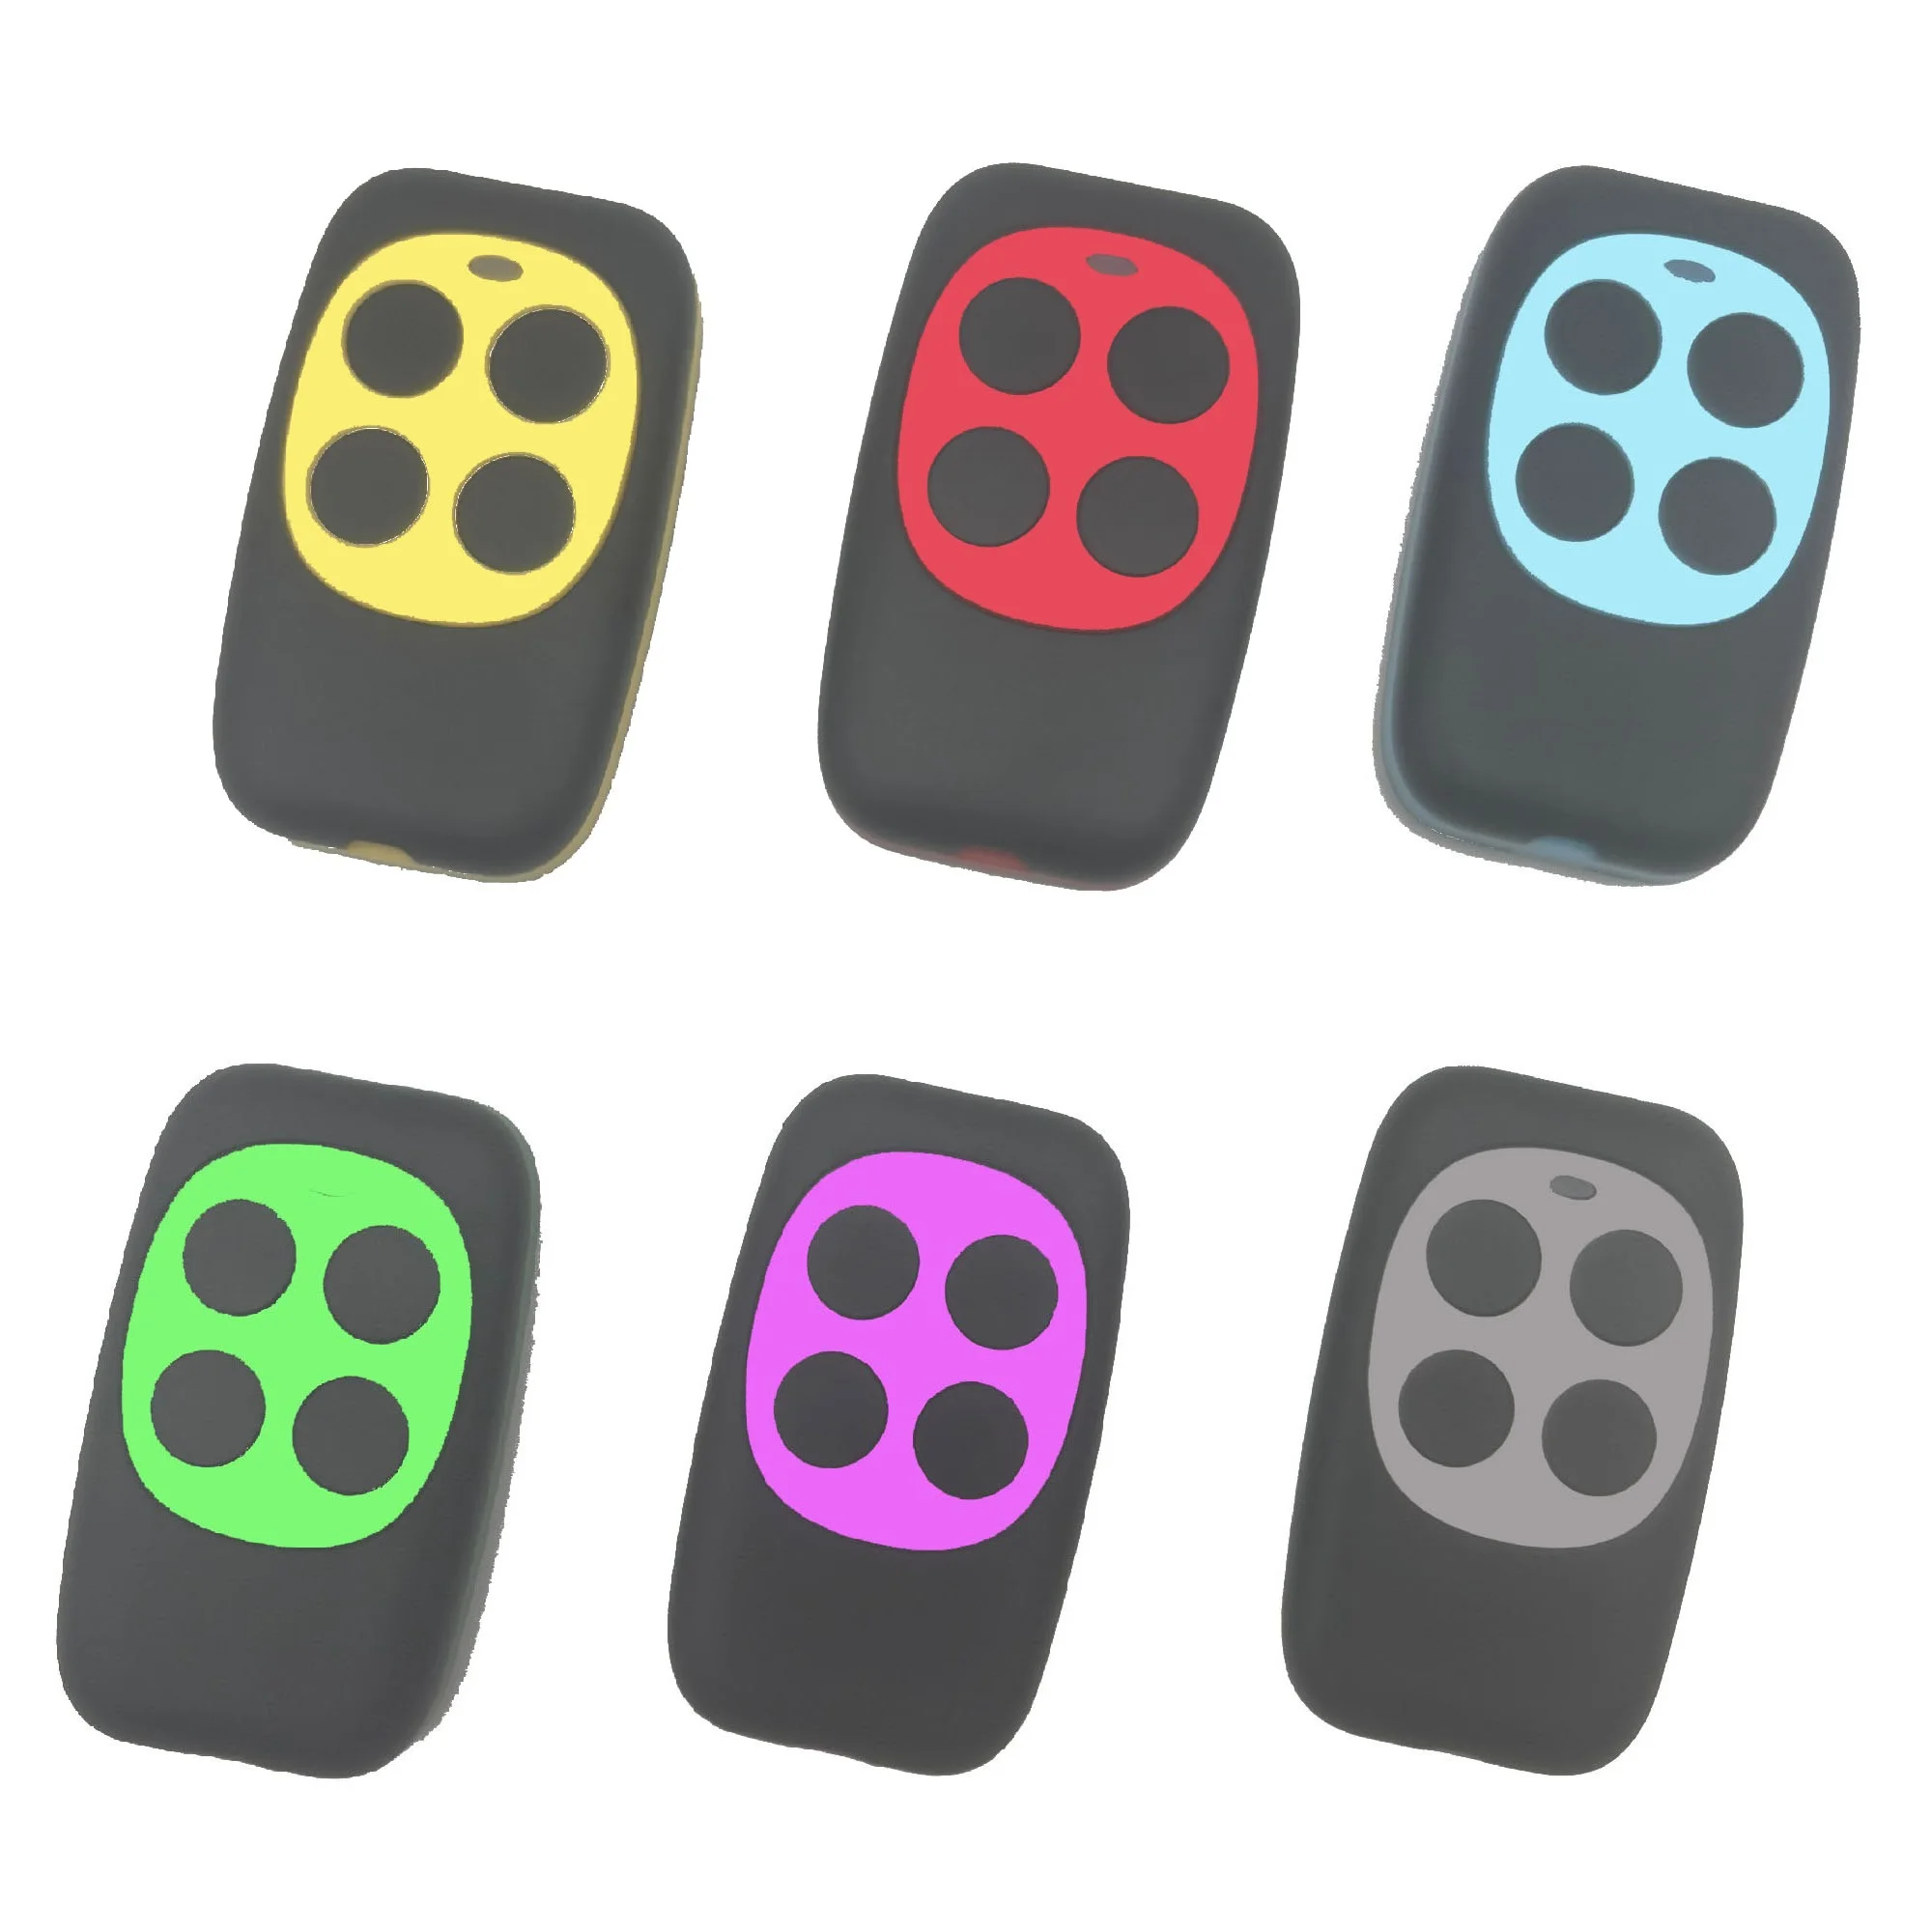 

433Mhz 4 Keys Colorful Remote Control RF Wireless Copy Code Remote Electric Cloning Gate Garage Door Auto Keychain for Home